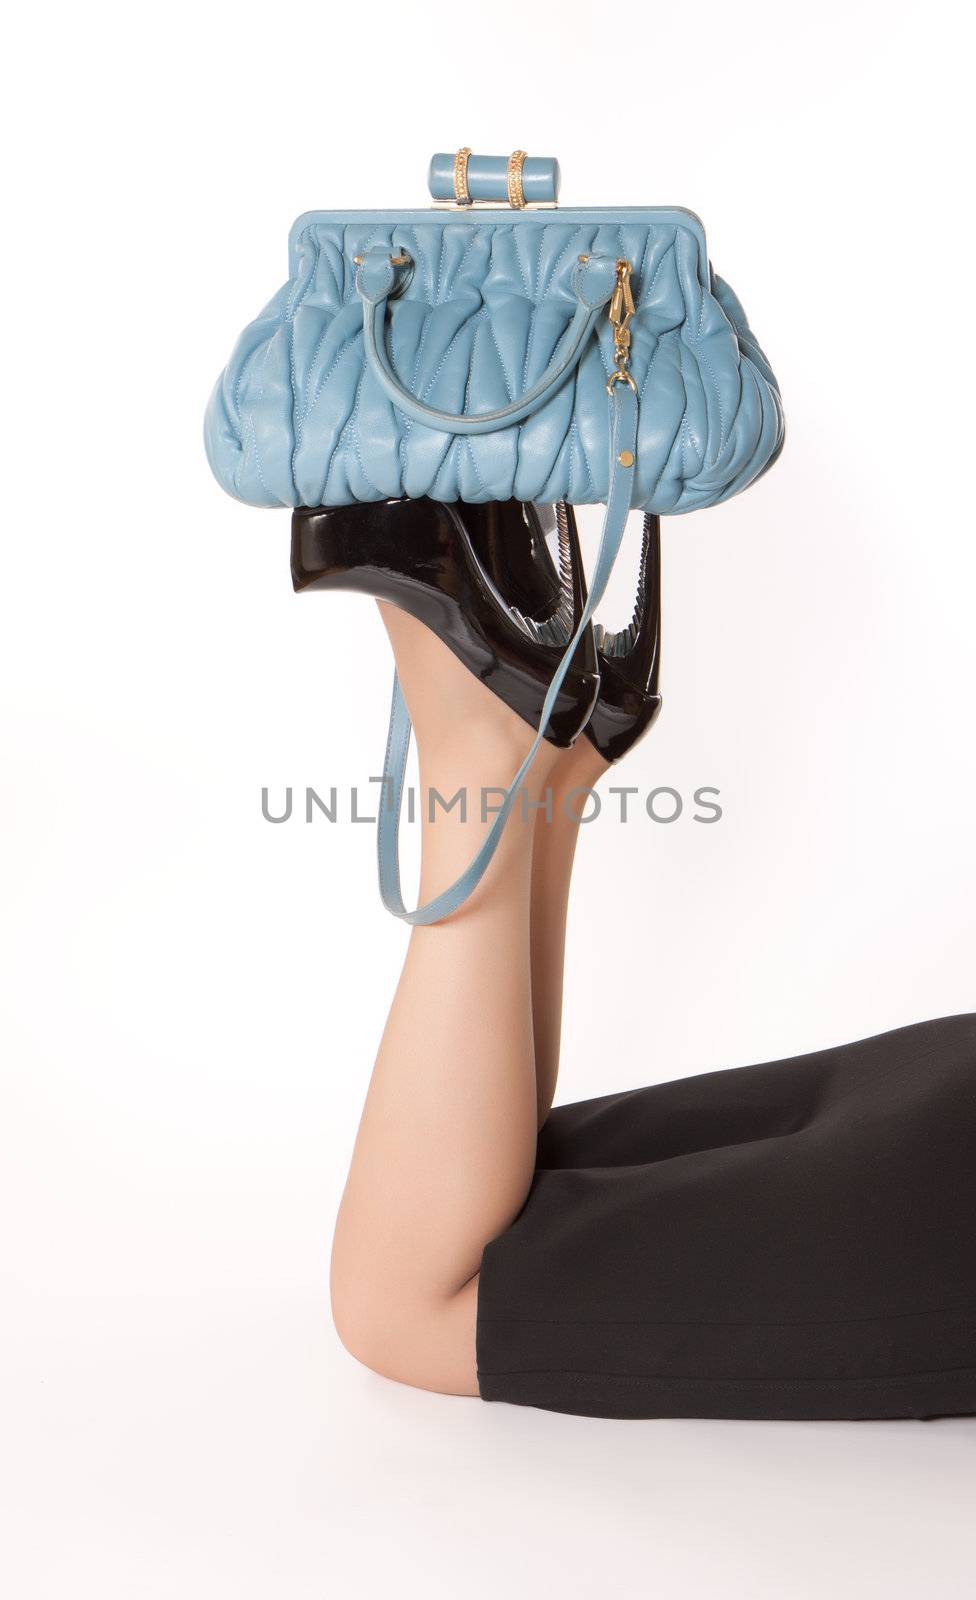 Shoes and bag by Discovod